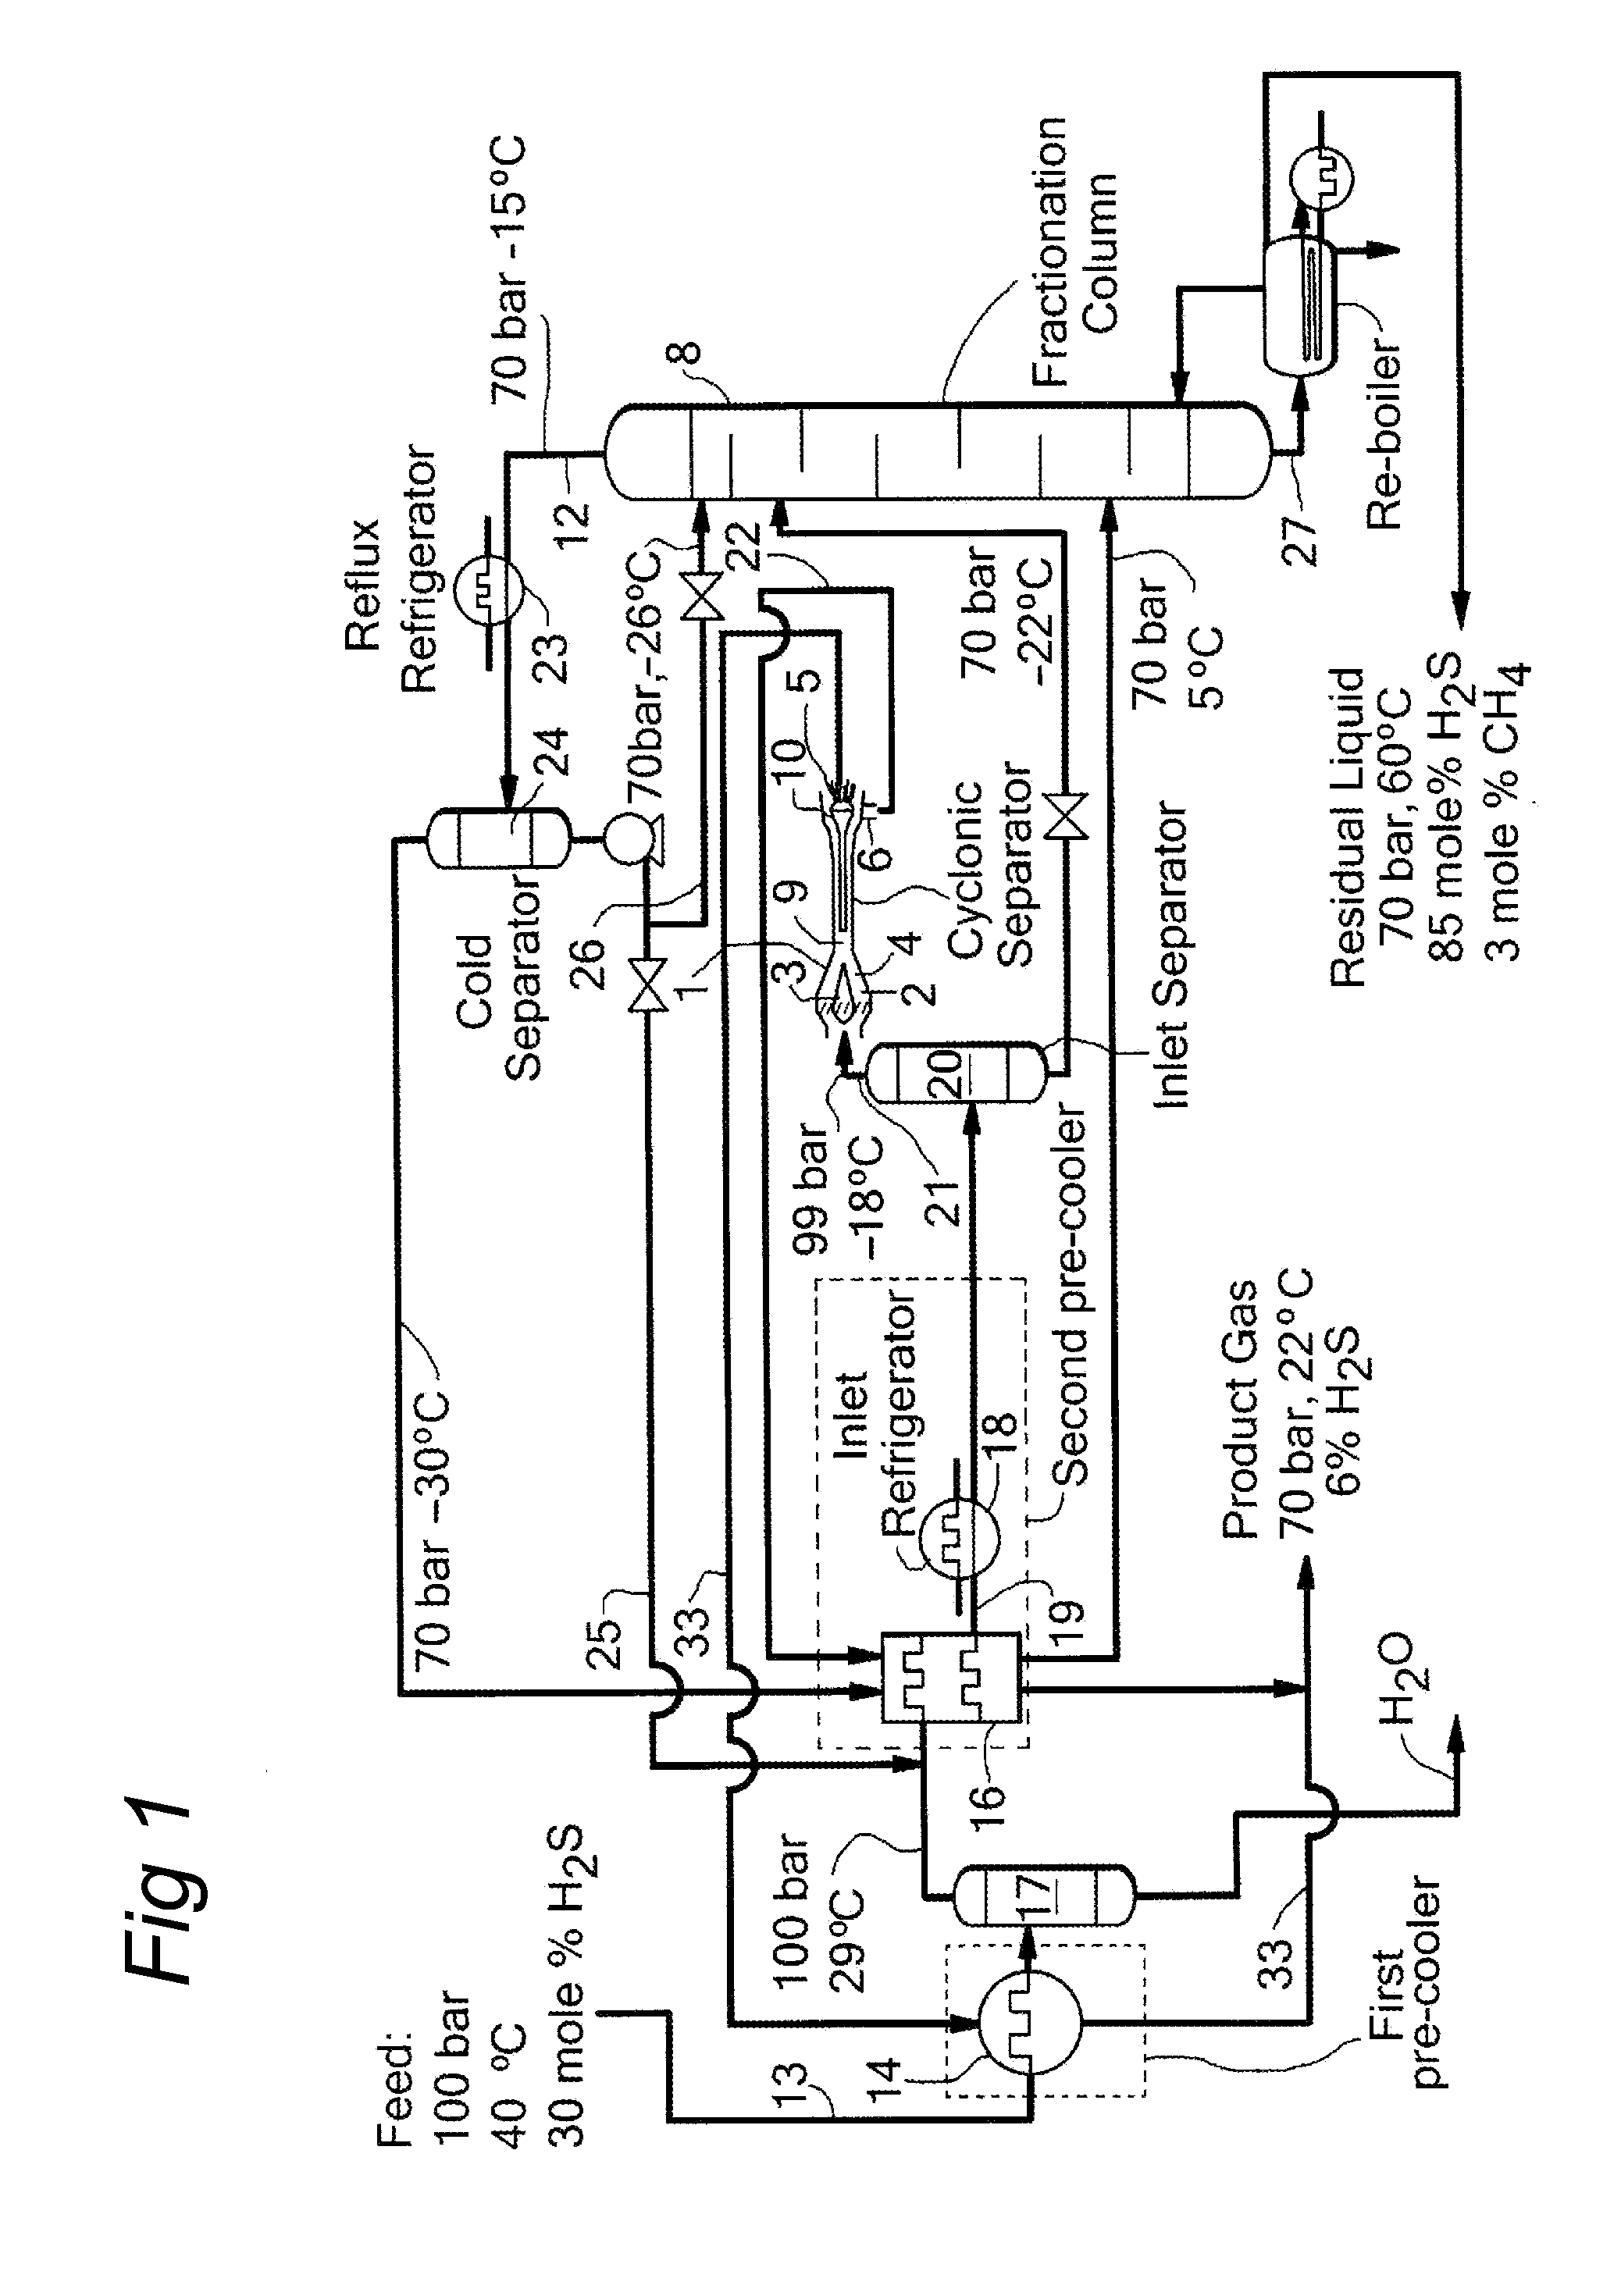 Method and system for removing h2s from a natural gas stream